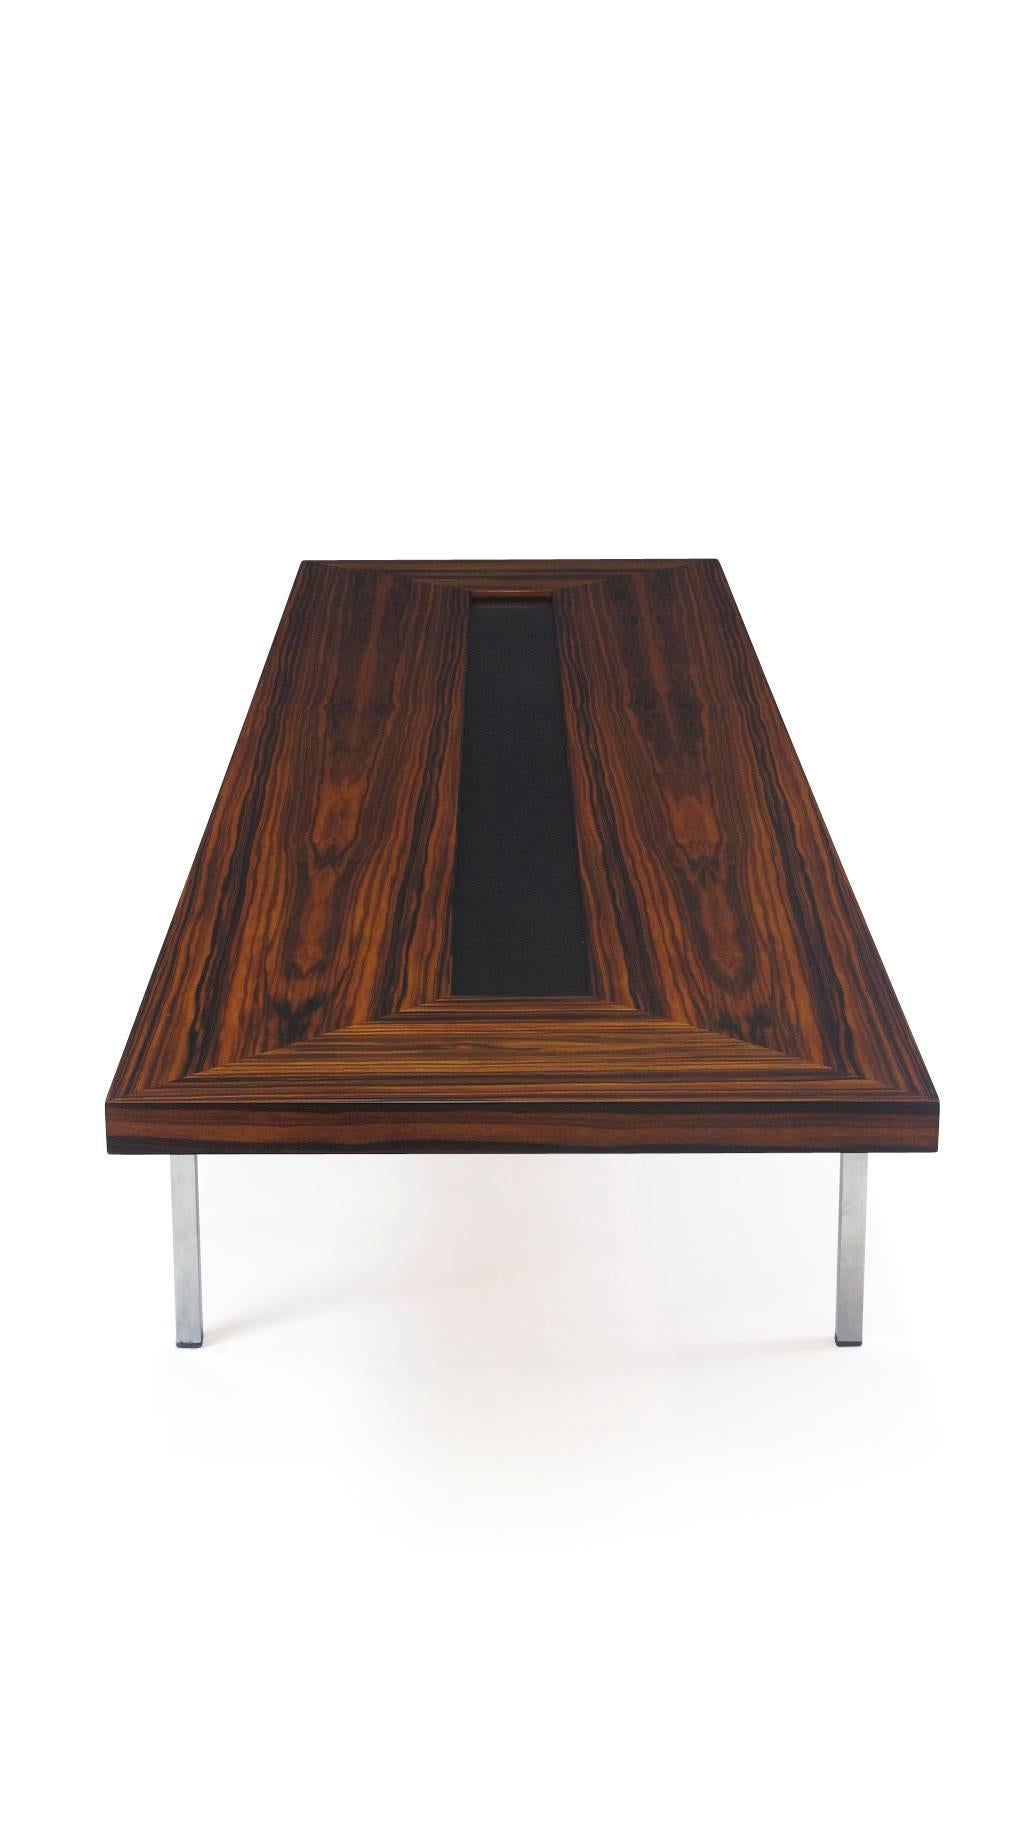 Extra long 1970's Santos Rosewood coffee table with rich grain and recessed black formica in center, raised on chrome legs. Professionally restored and in excellent condition.